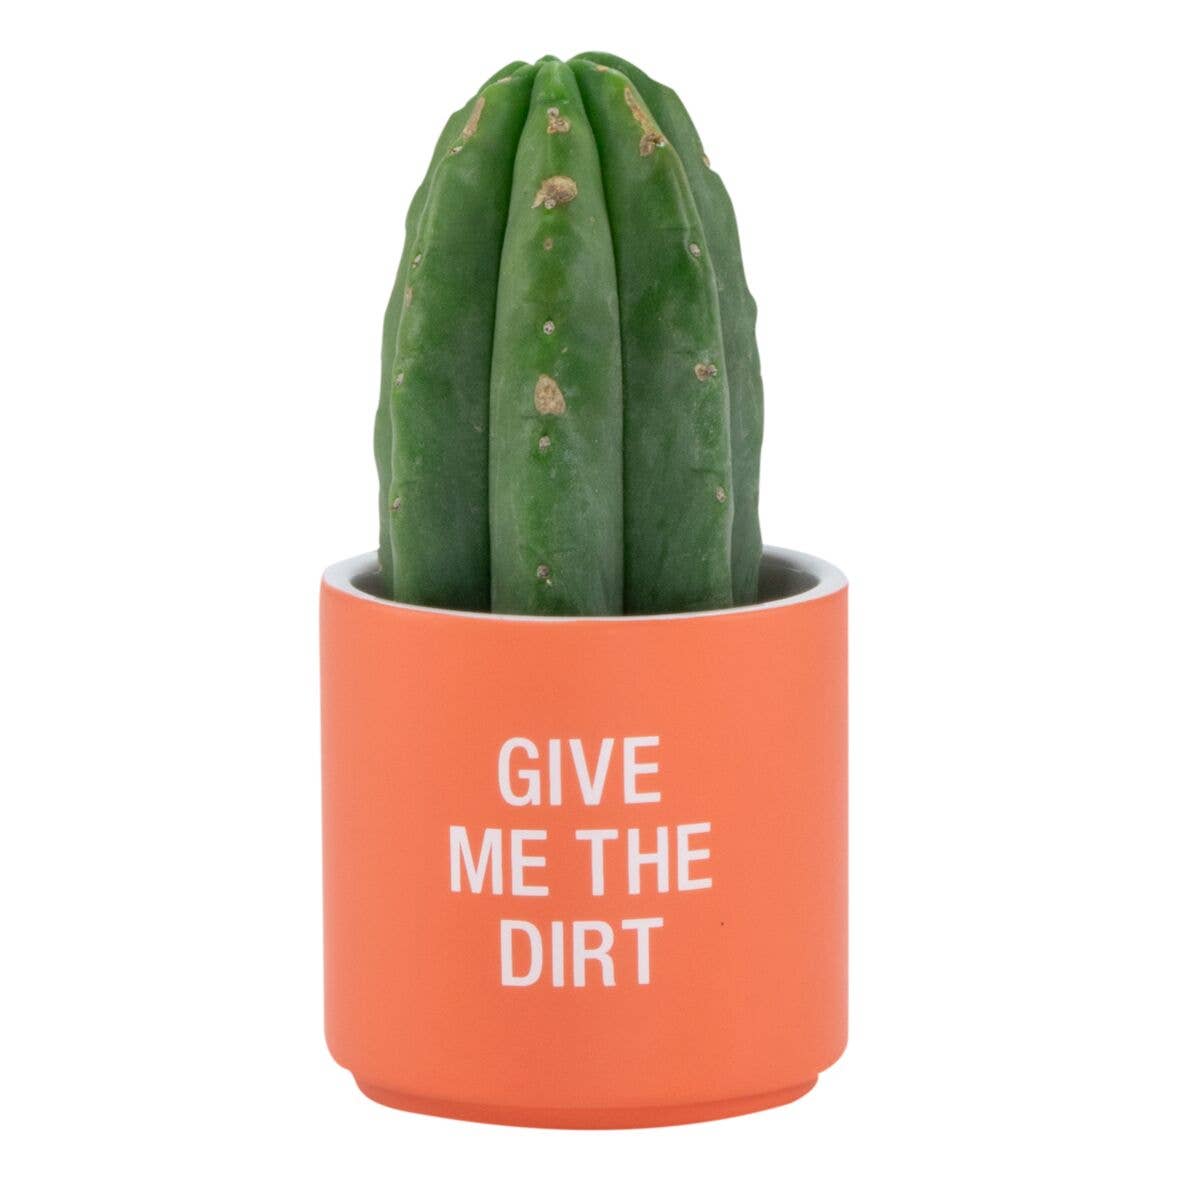 Give Me the Dirt Small Planter